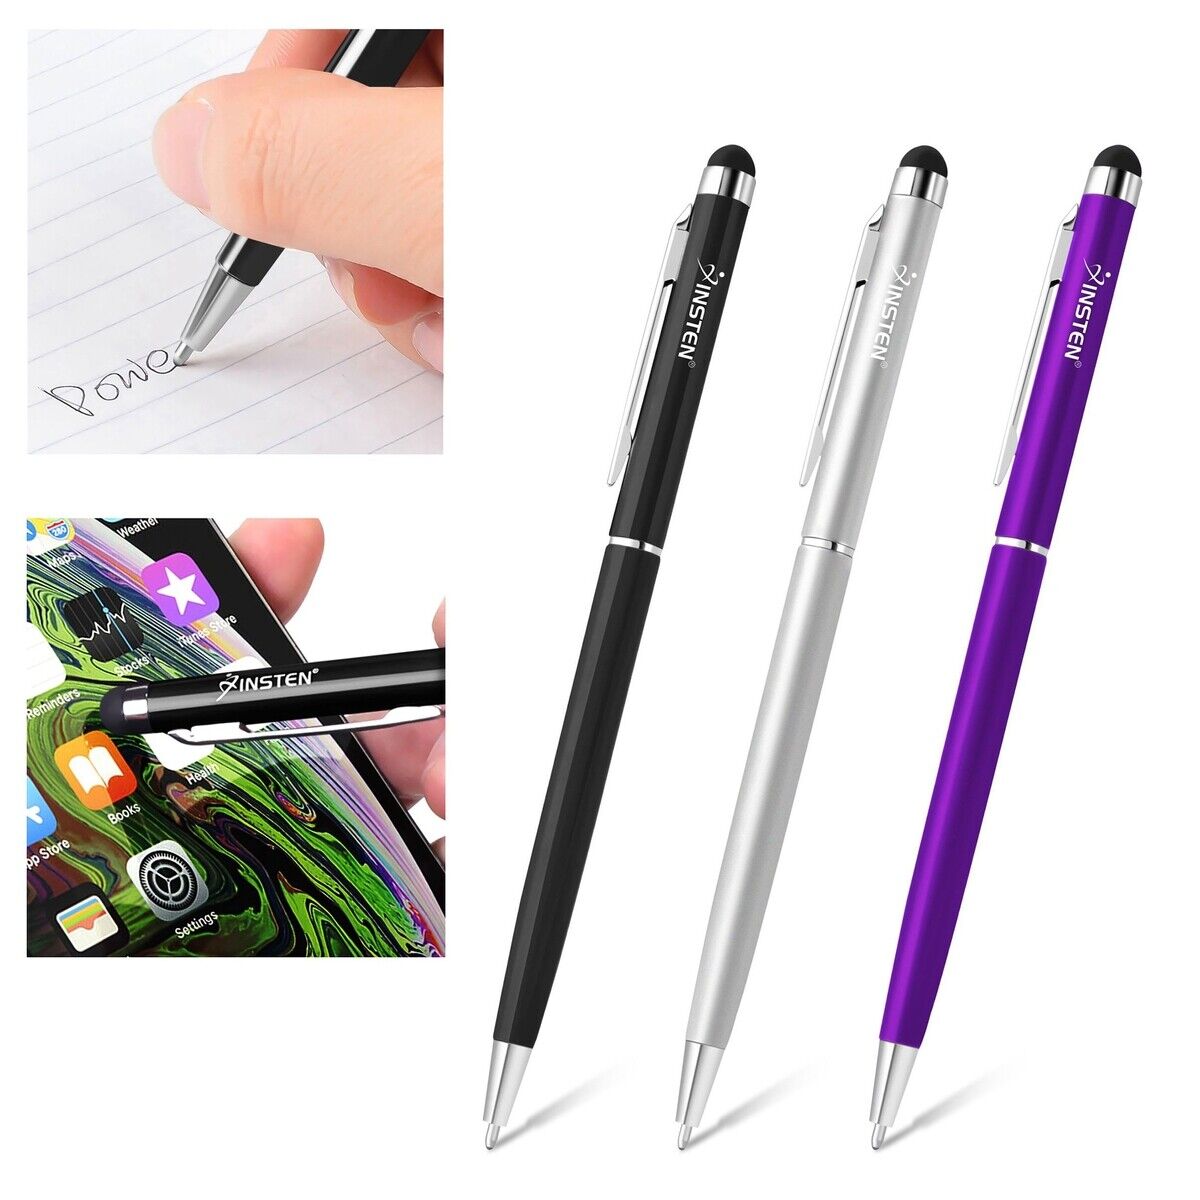 3x 2-in-1 Metal Touch Screen Stylus Ballpoint Pen iPad iphone iPod Tablet Kindle